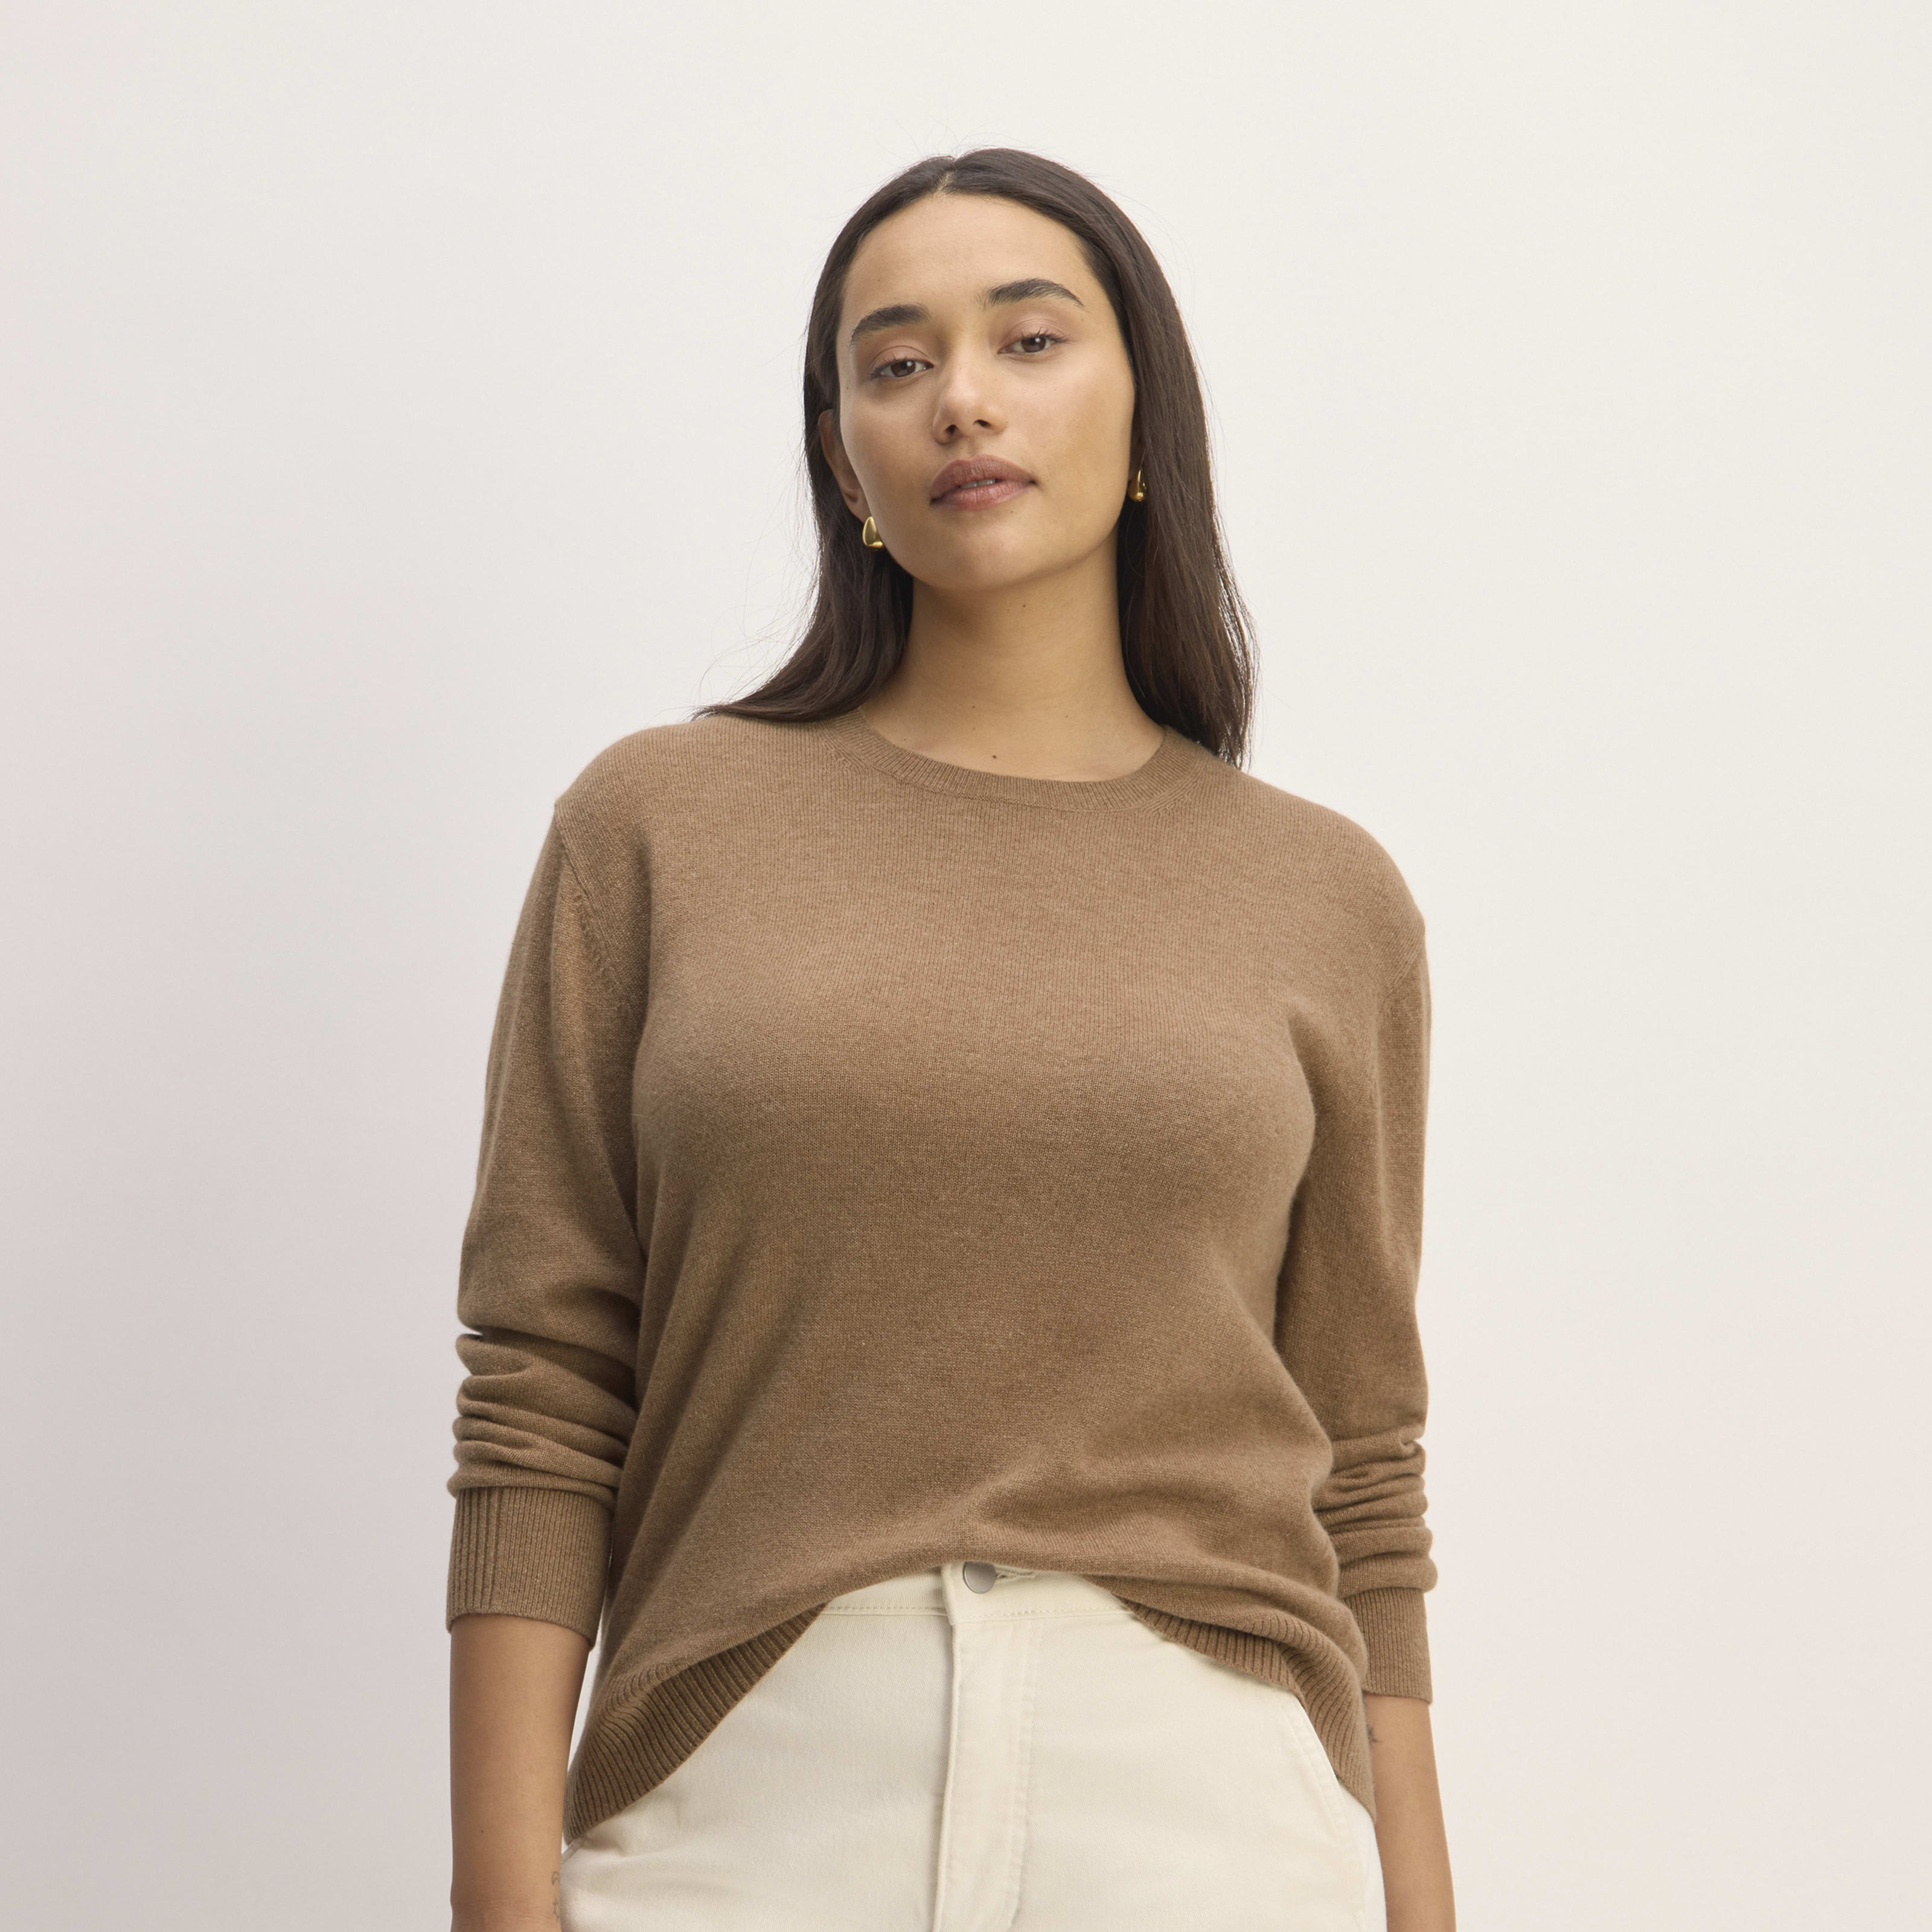 women's cashmere classic crew sweater by everlane in heathered brown, size xxs